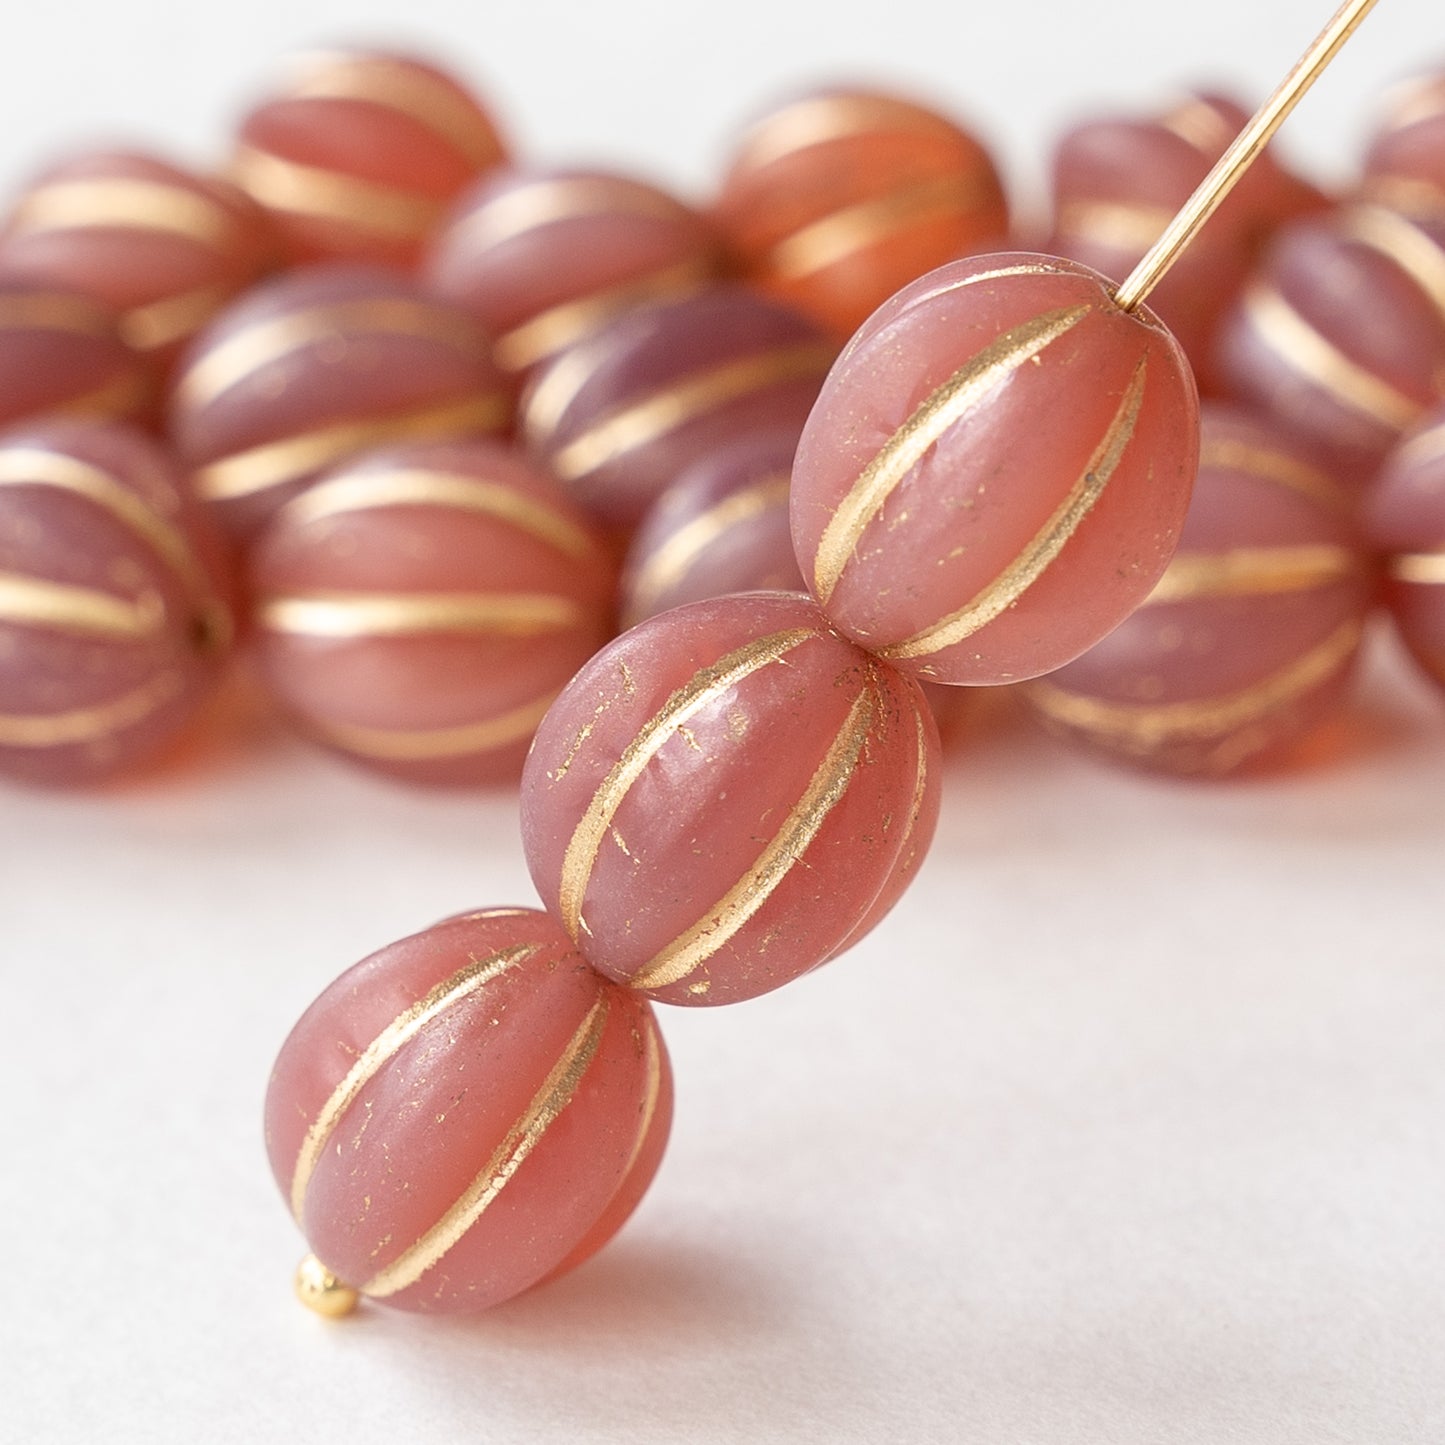 Load image into Gallery viewer, 12mm Melon Beads -   Pink with Gold Wash - 15 Beads
